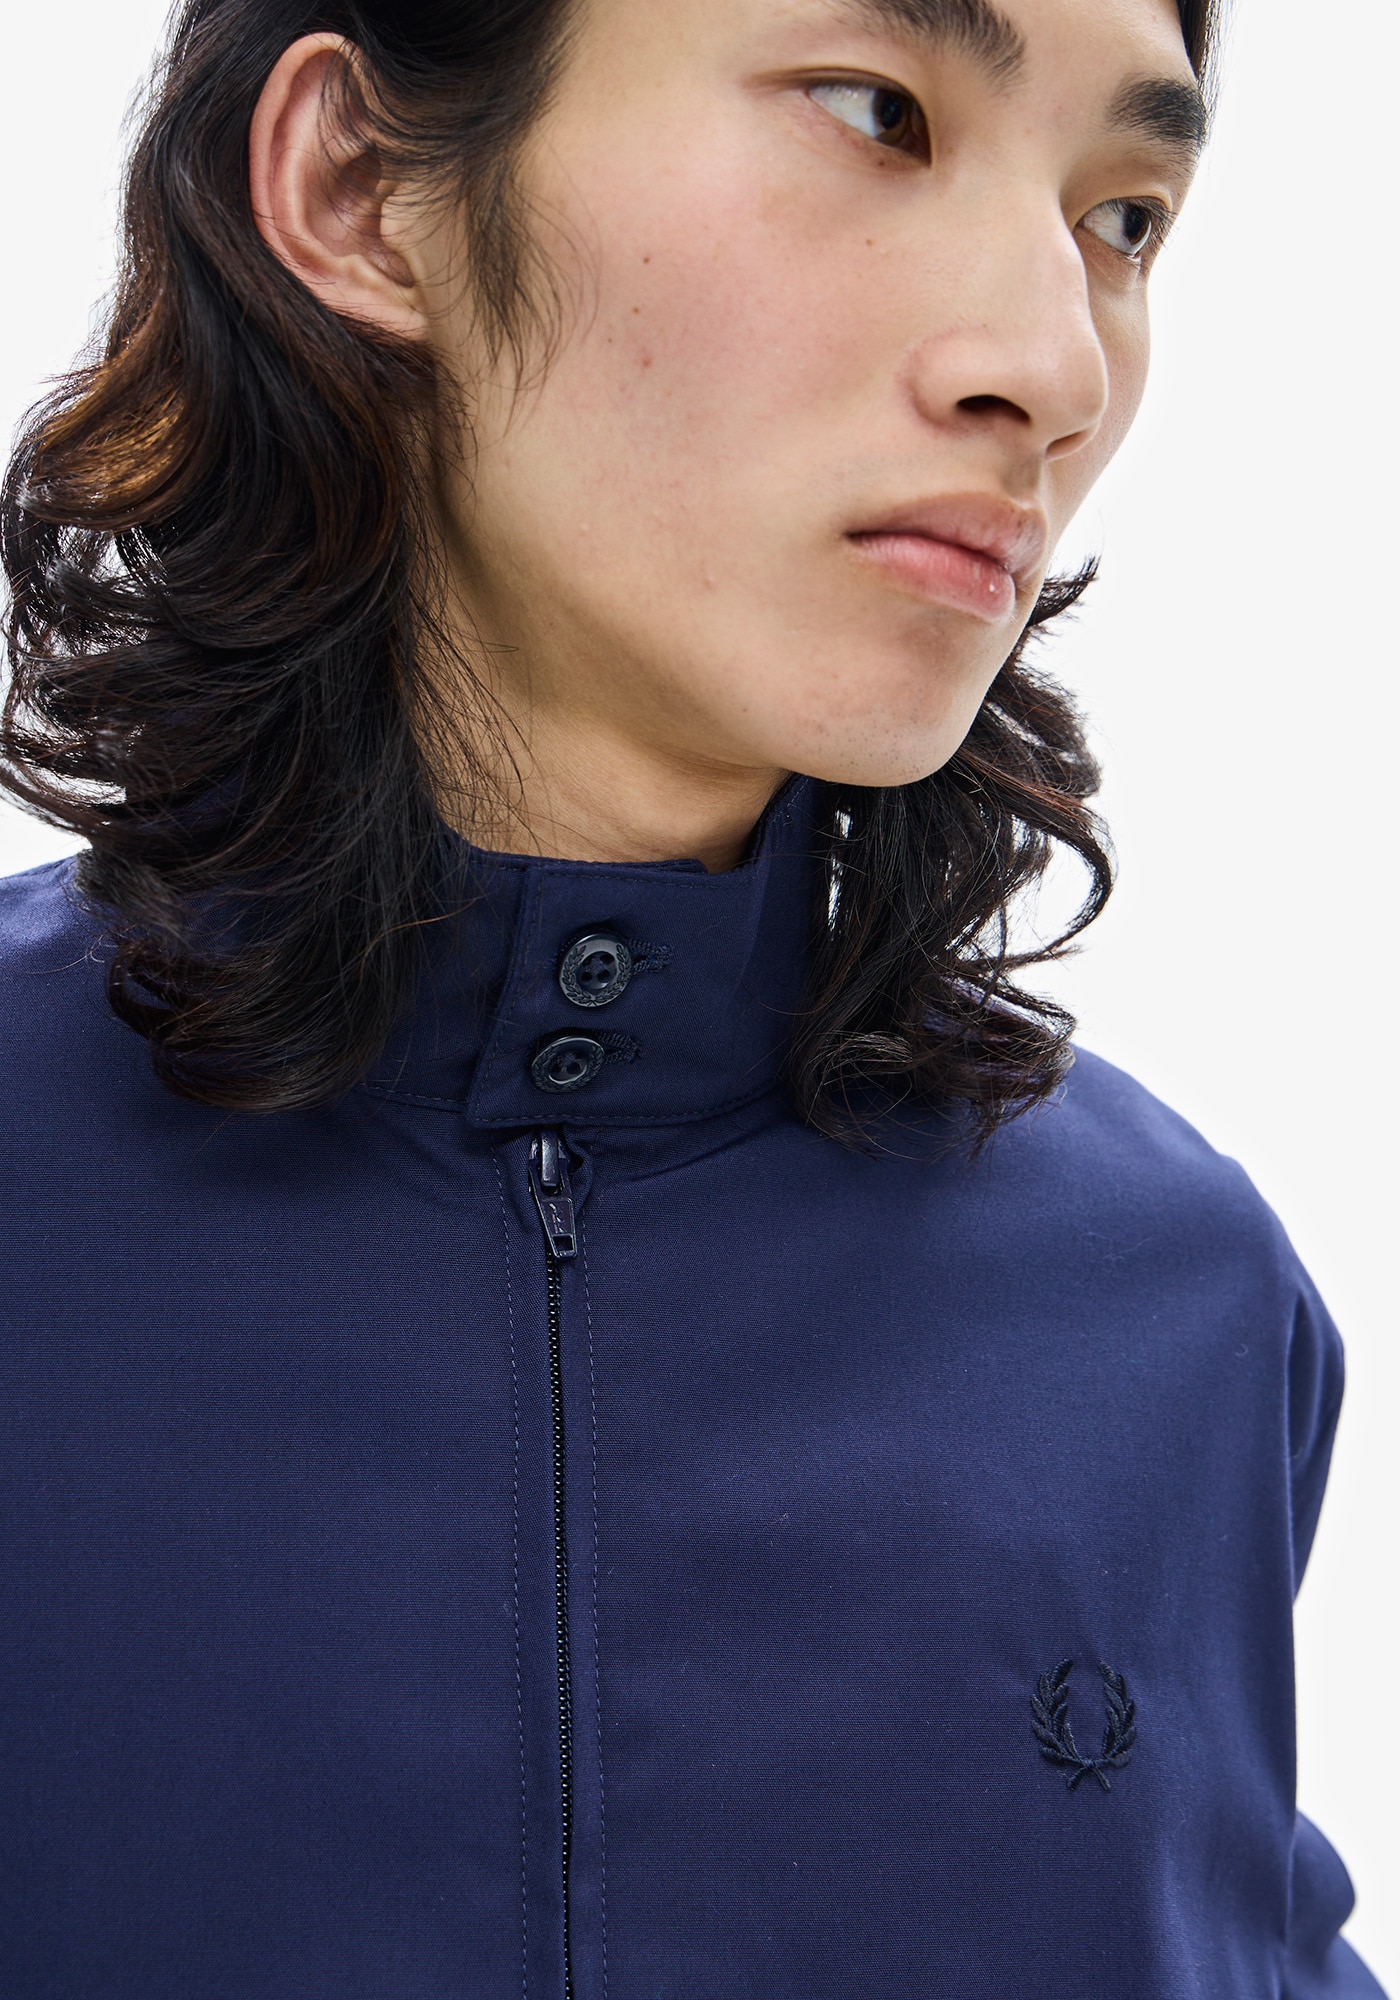 Made In England Harrington Jacket|FRED PERRY(フレッドペリー)の通販